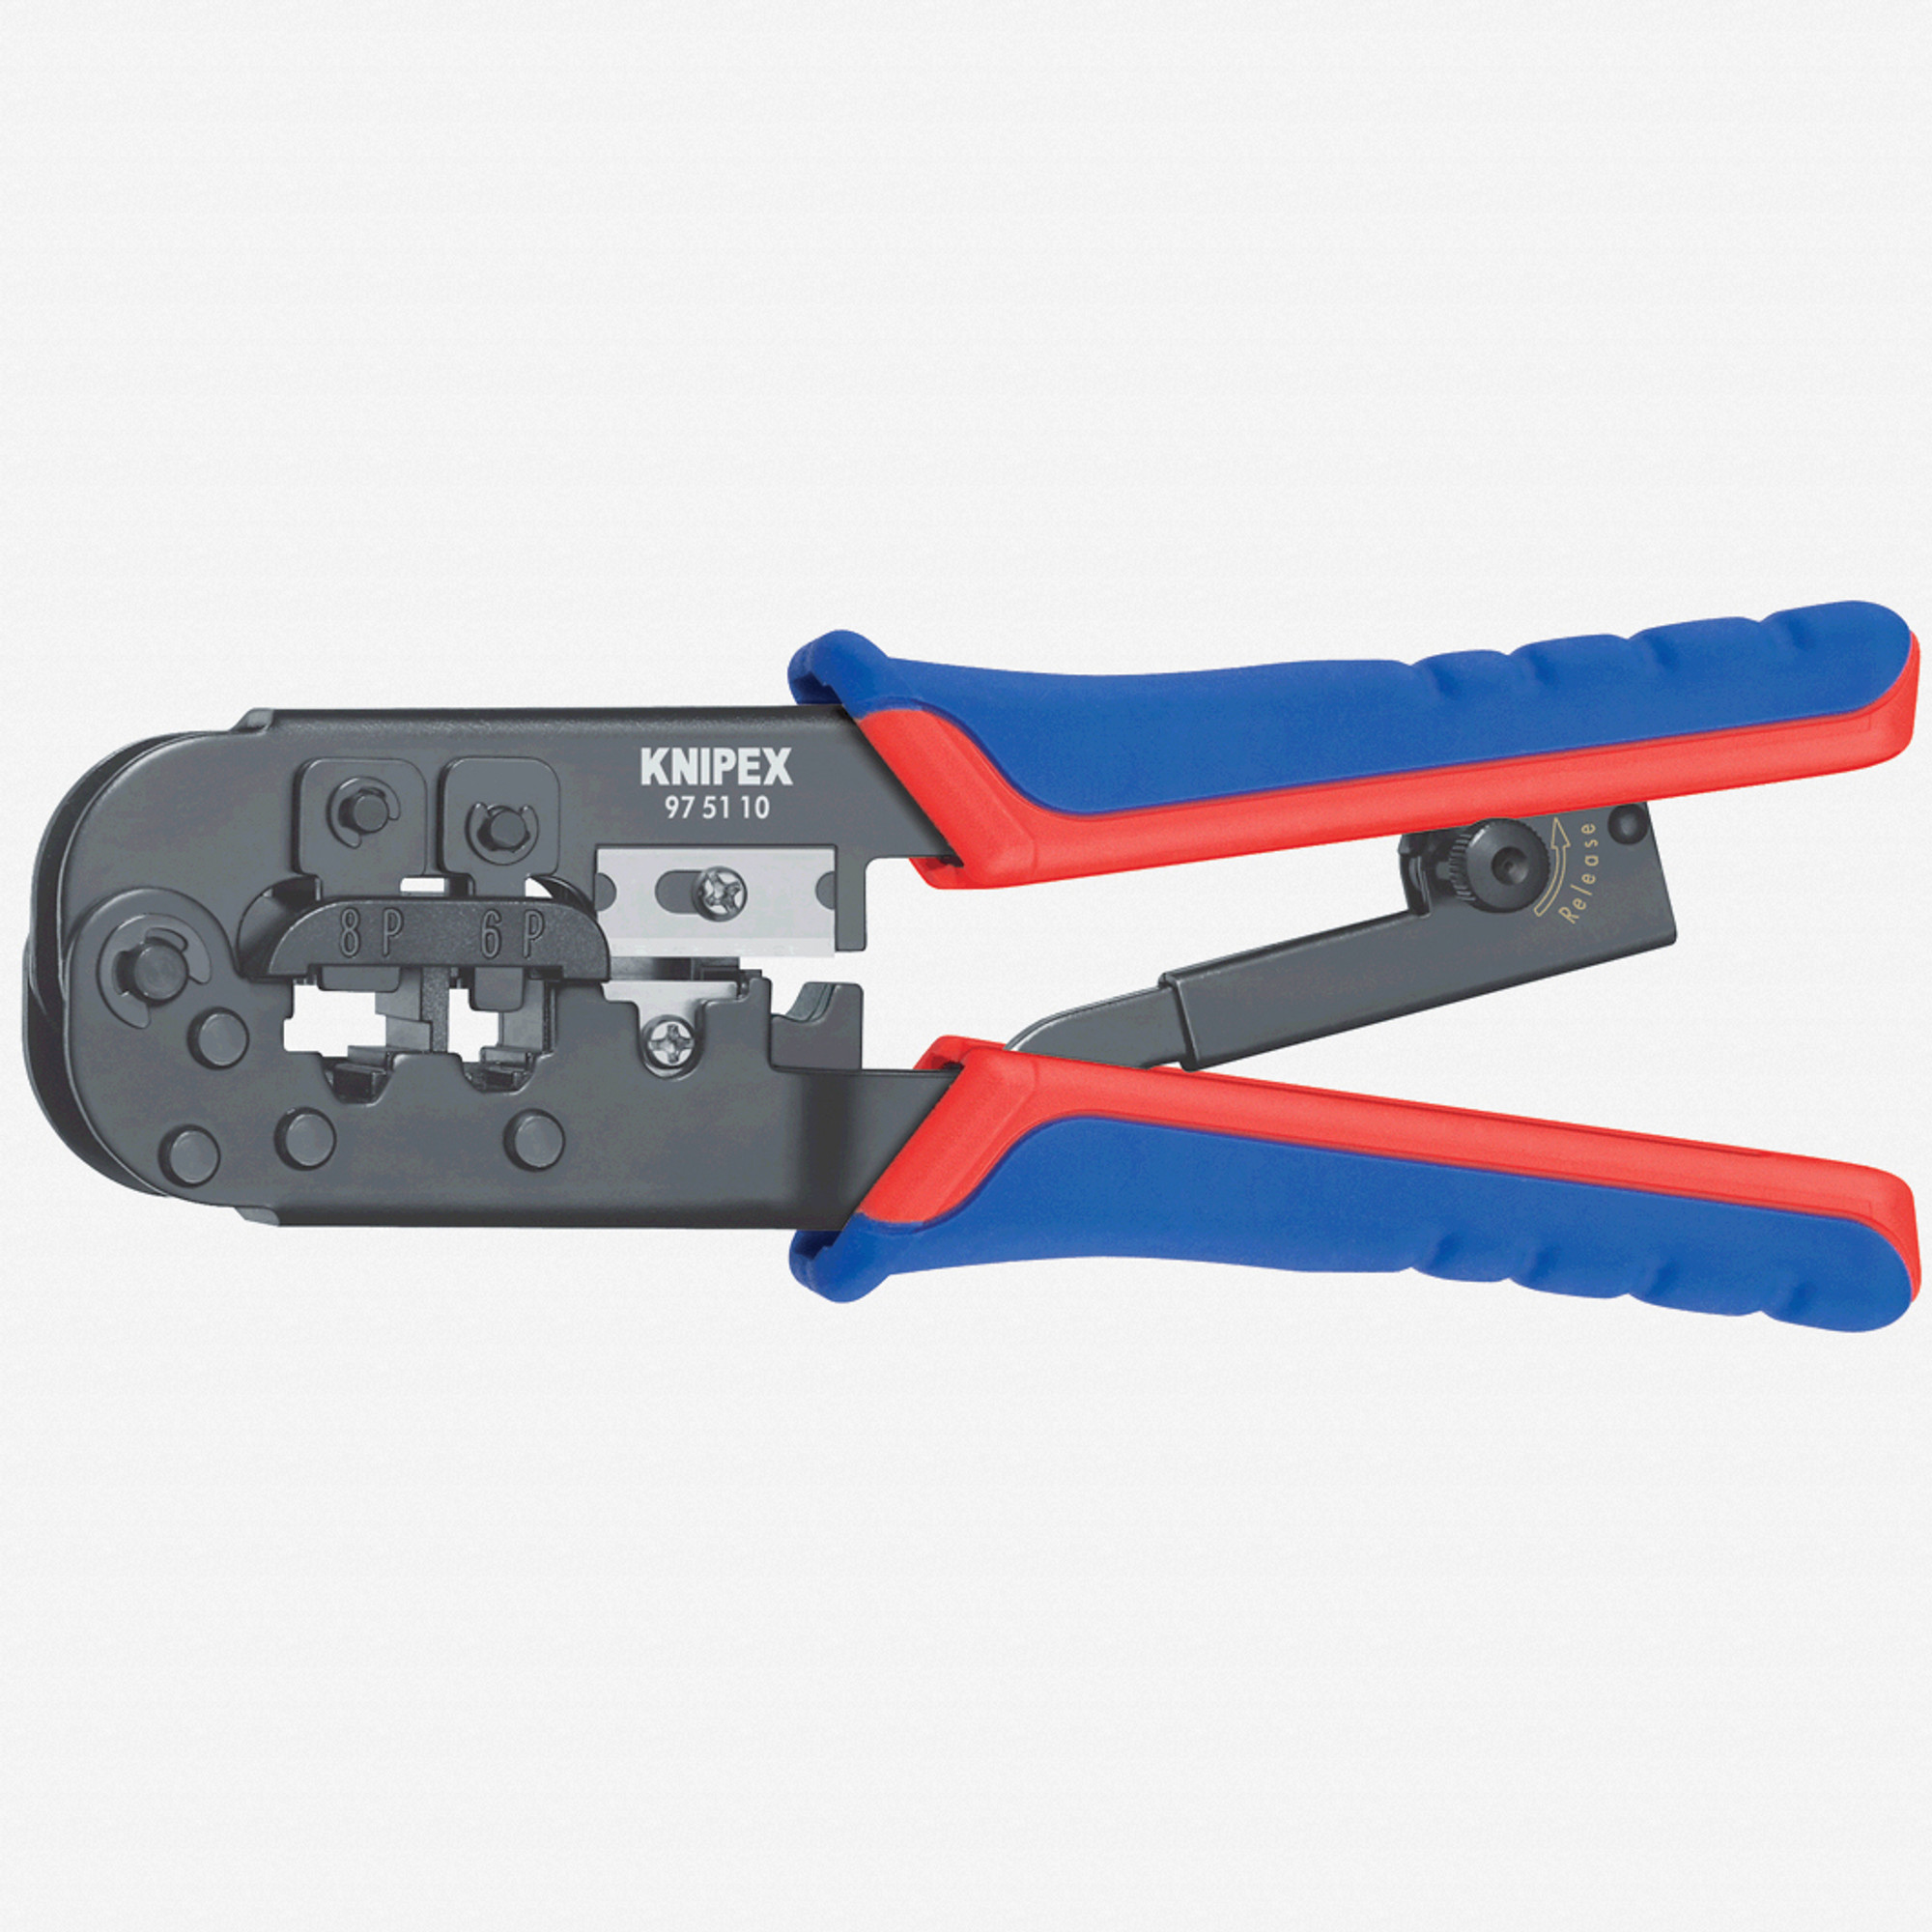 Knipex 97-51-10 Crimping Pliers for Western plugs - MultiGrip - KC Tool